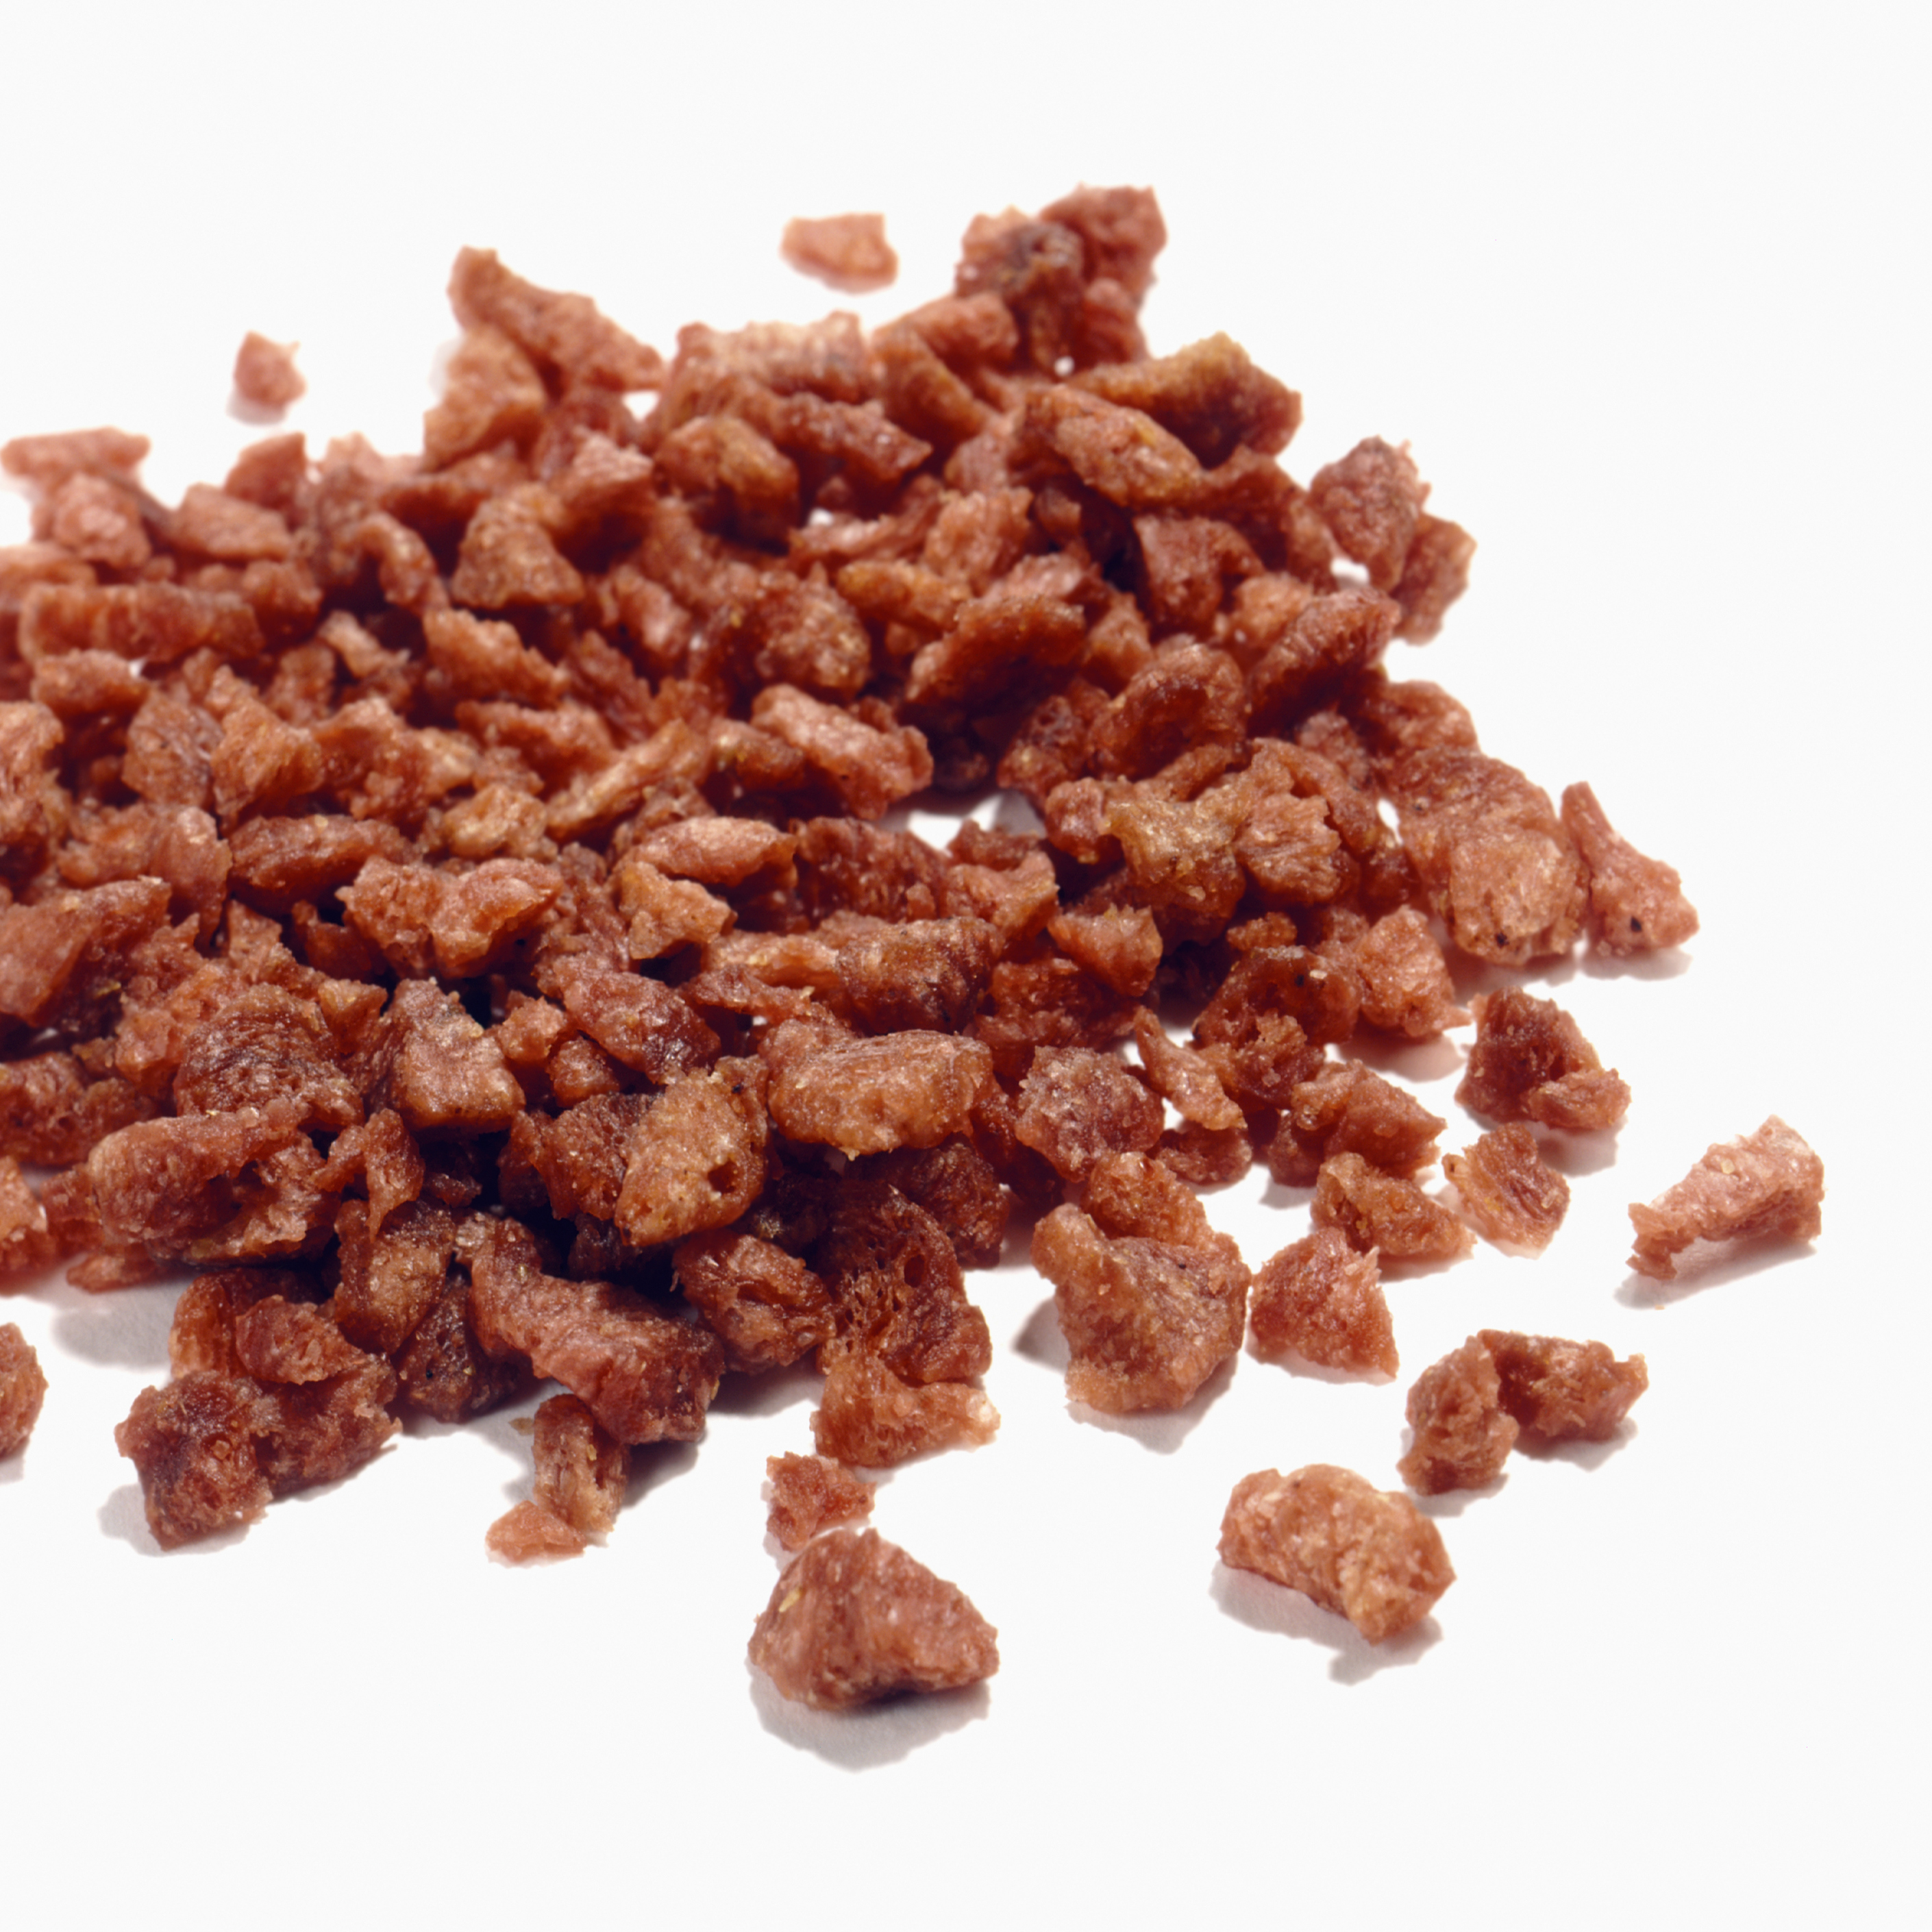 Augason Farms Bacon Flavored Bits Vegetarian Meat Substitute 2 lbs 2 oz No. 10 Can - image 5 of 9